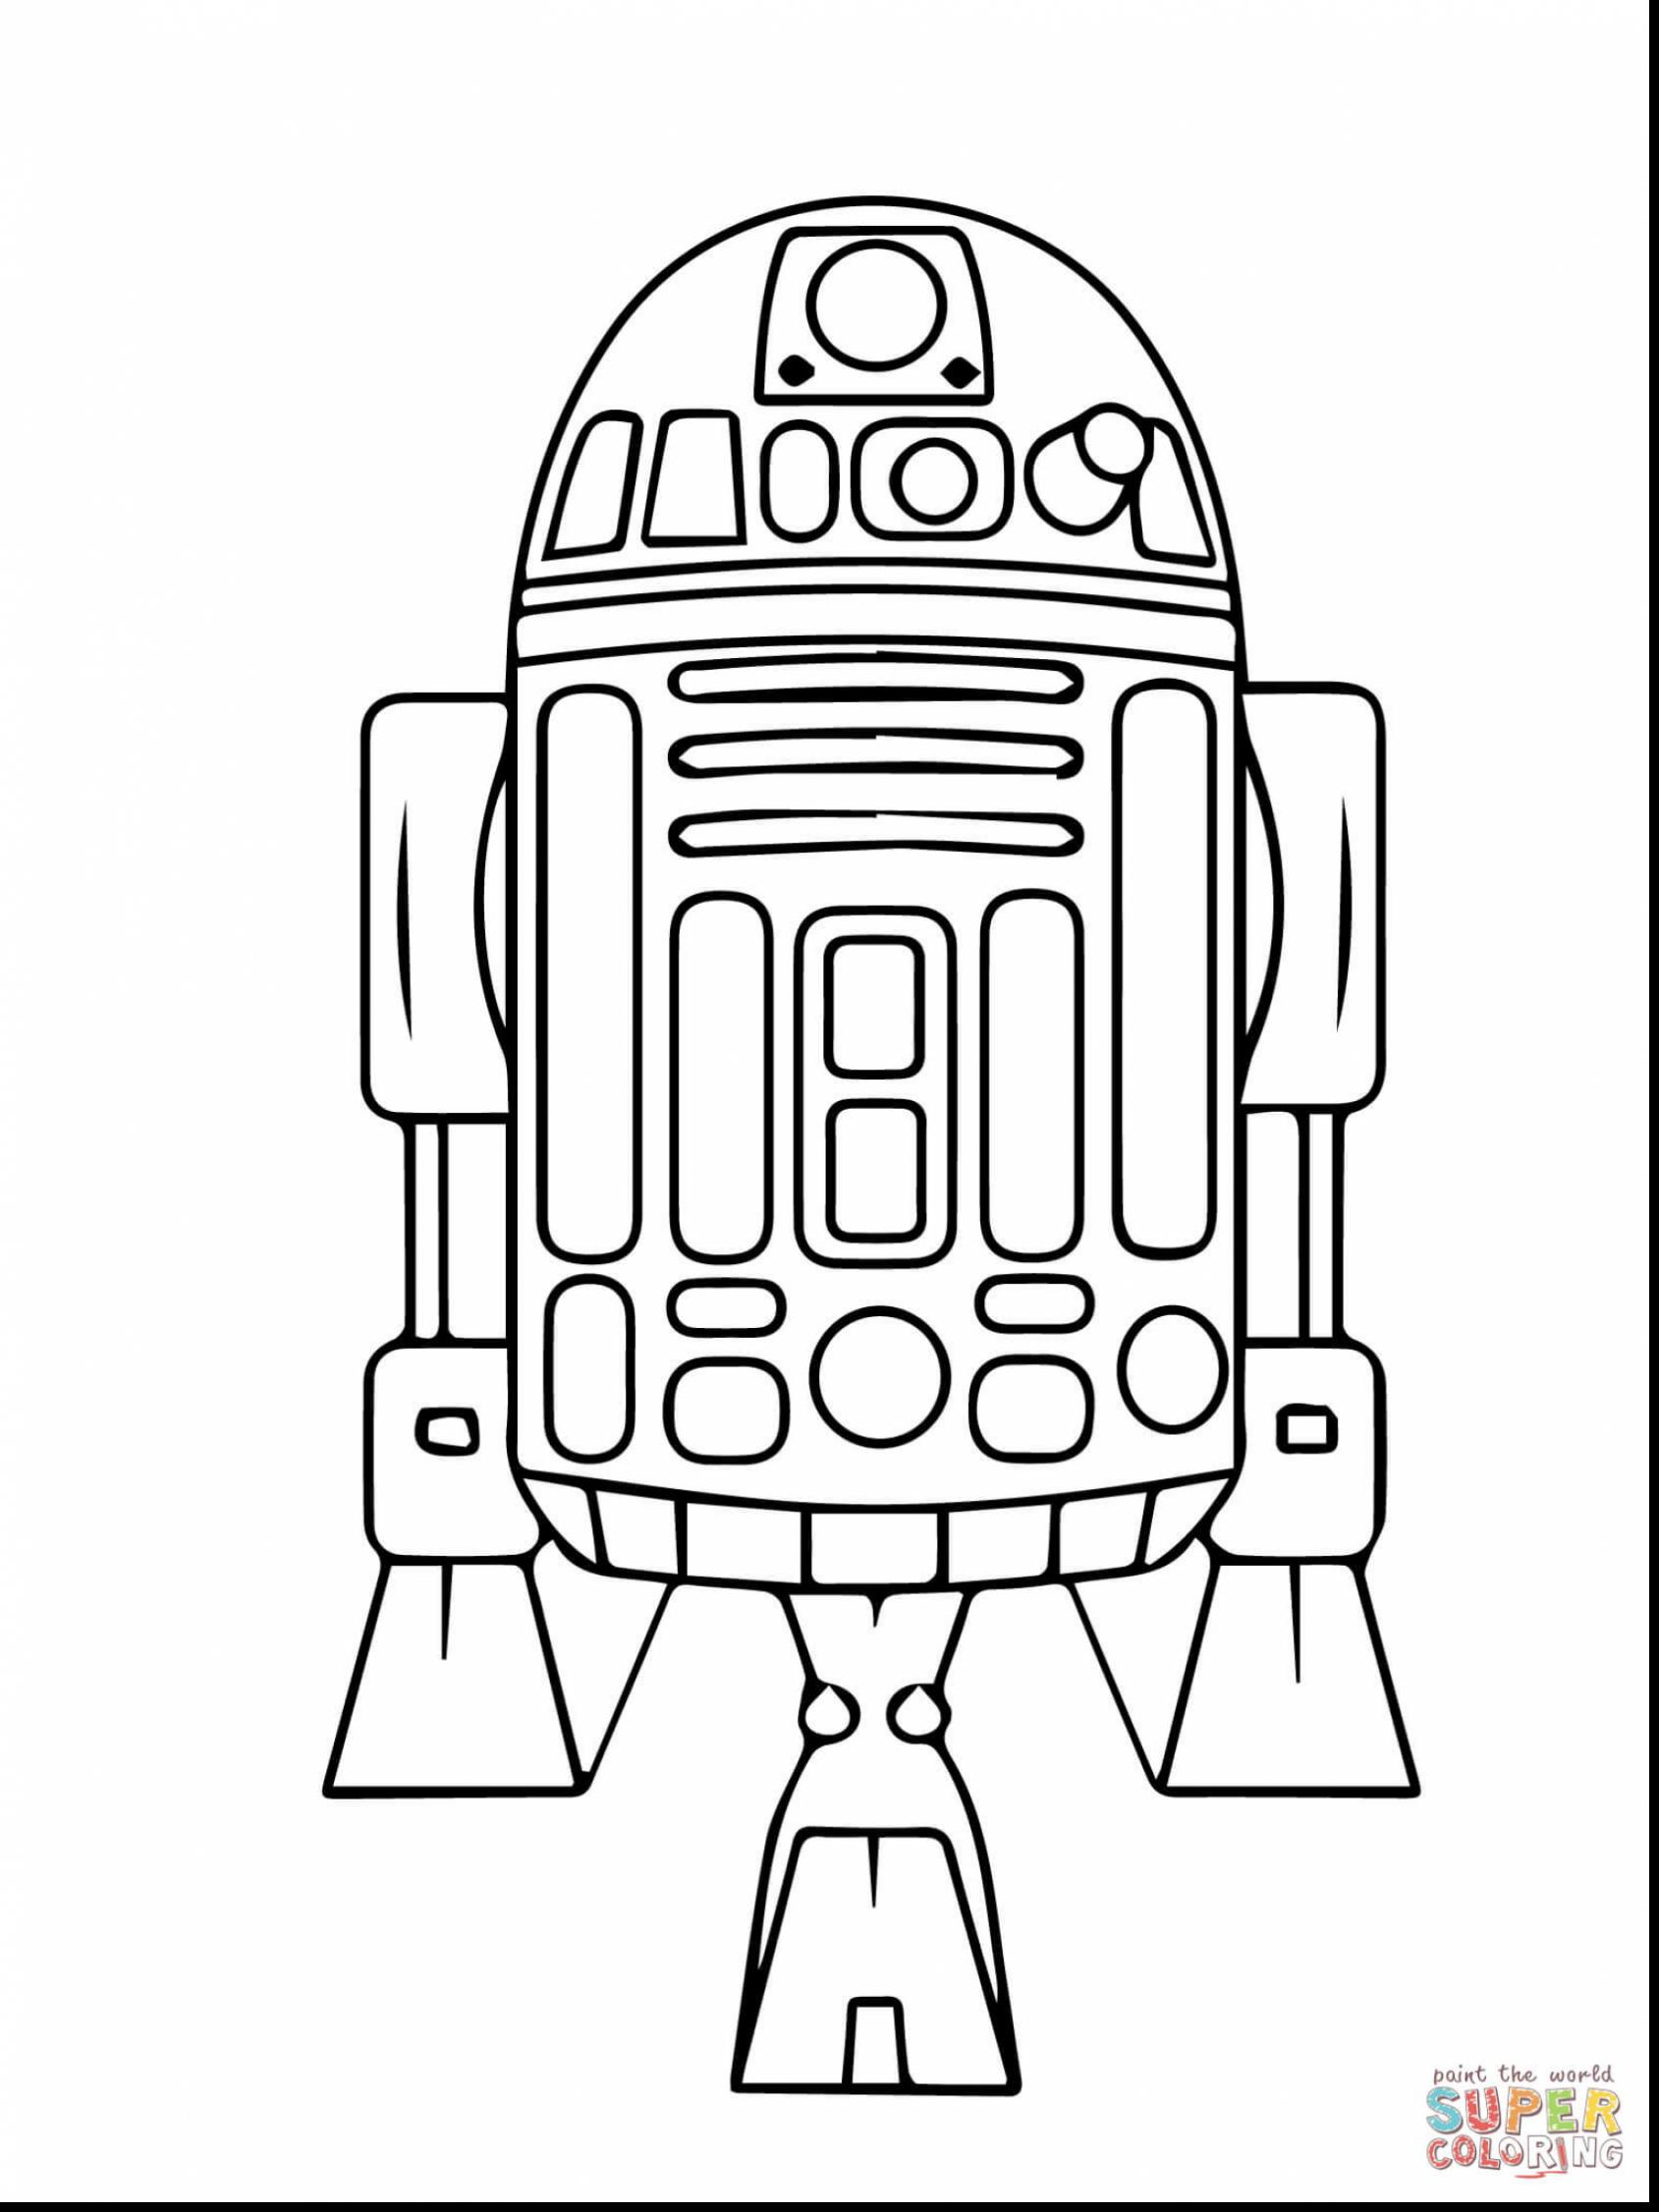 Star Wars R2d2 Coloring Pages at GetColorings.com | Free printable ...